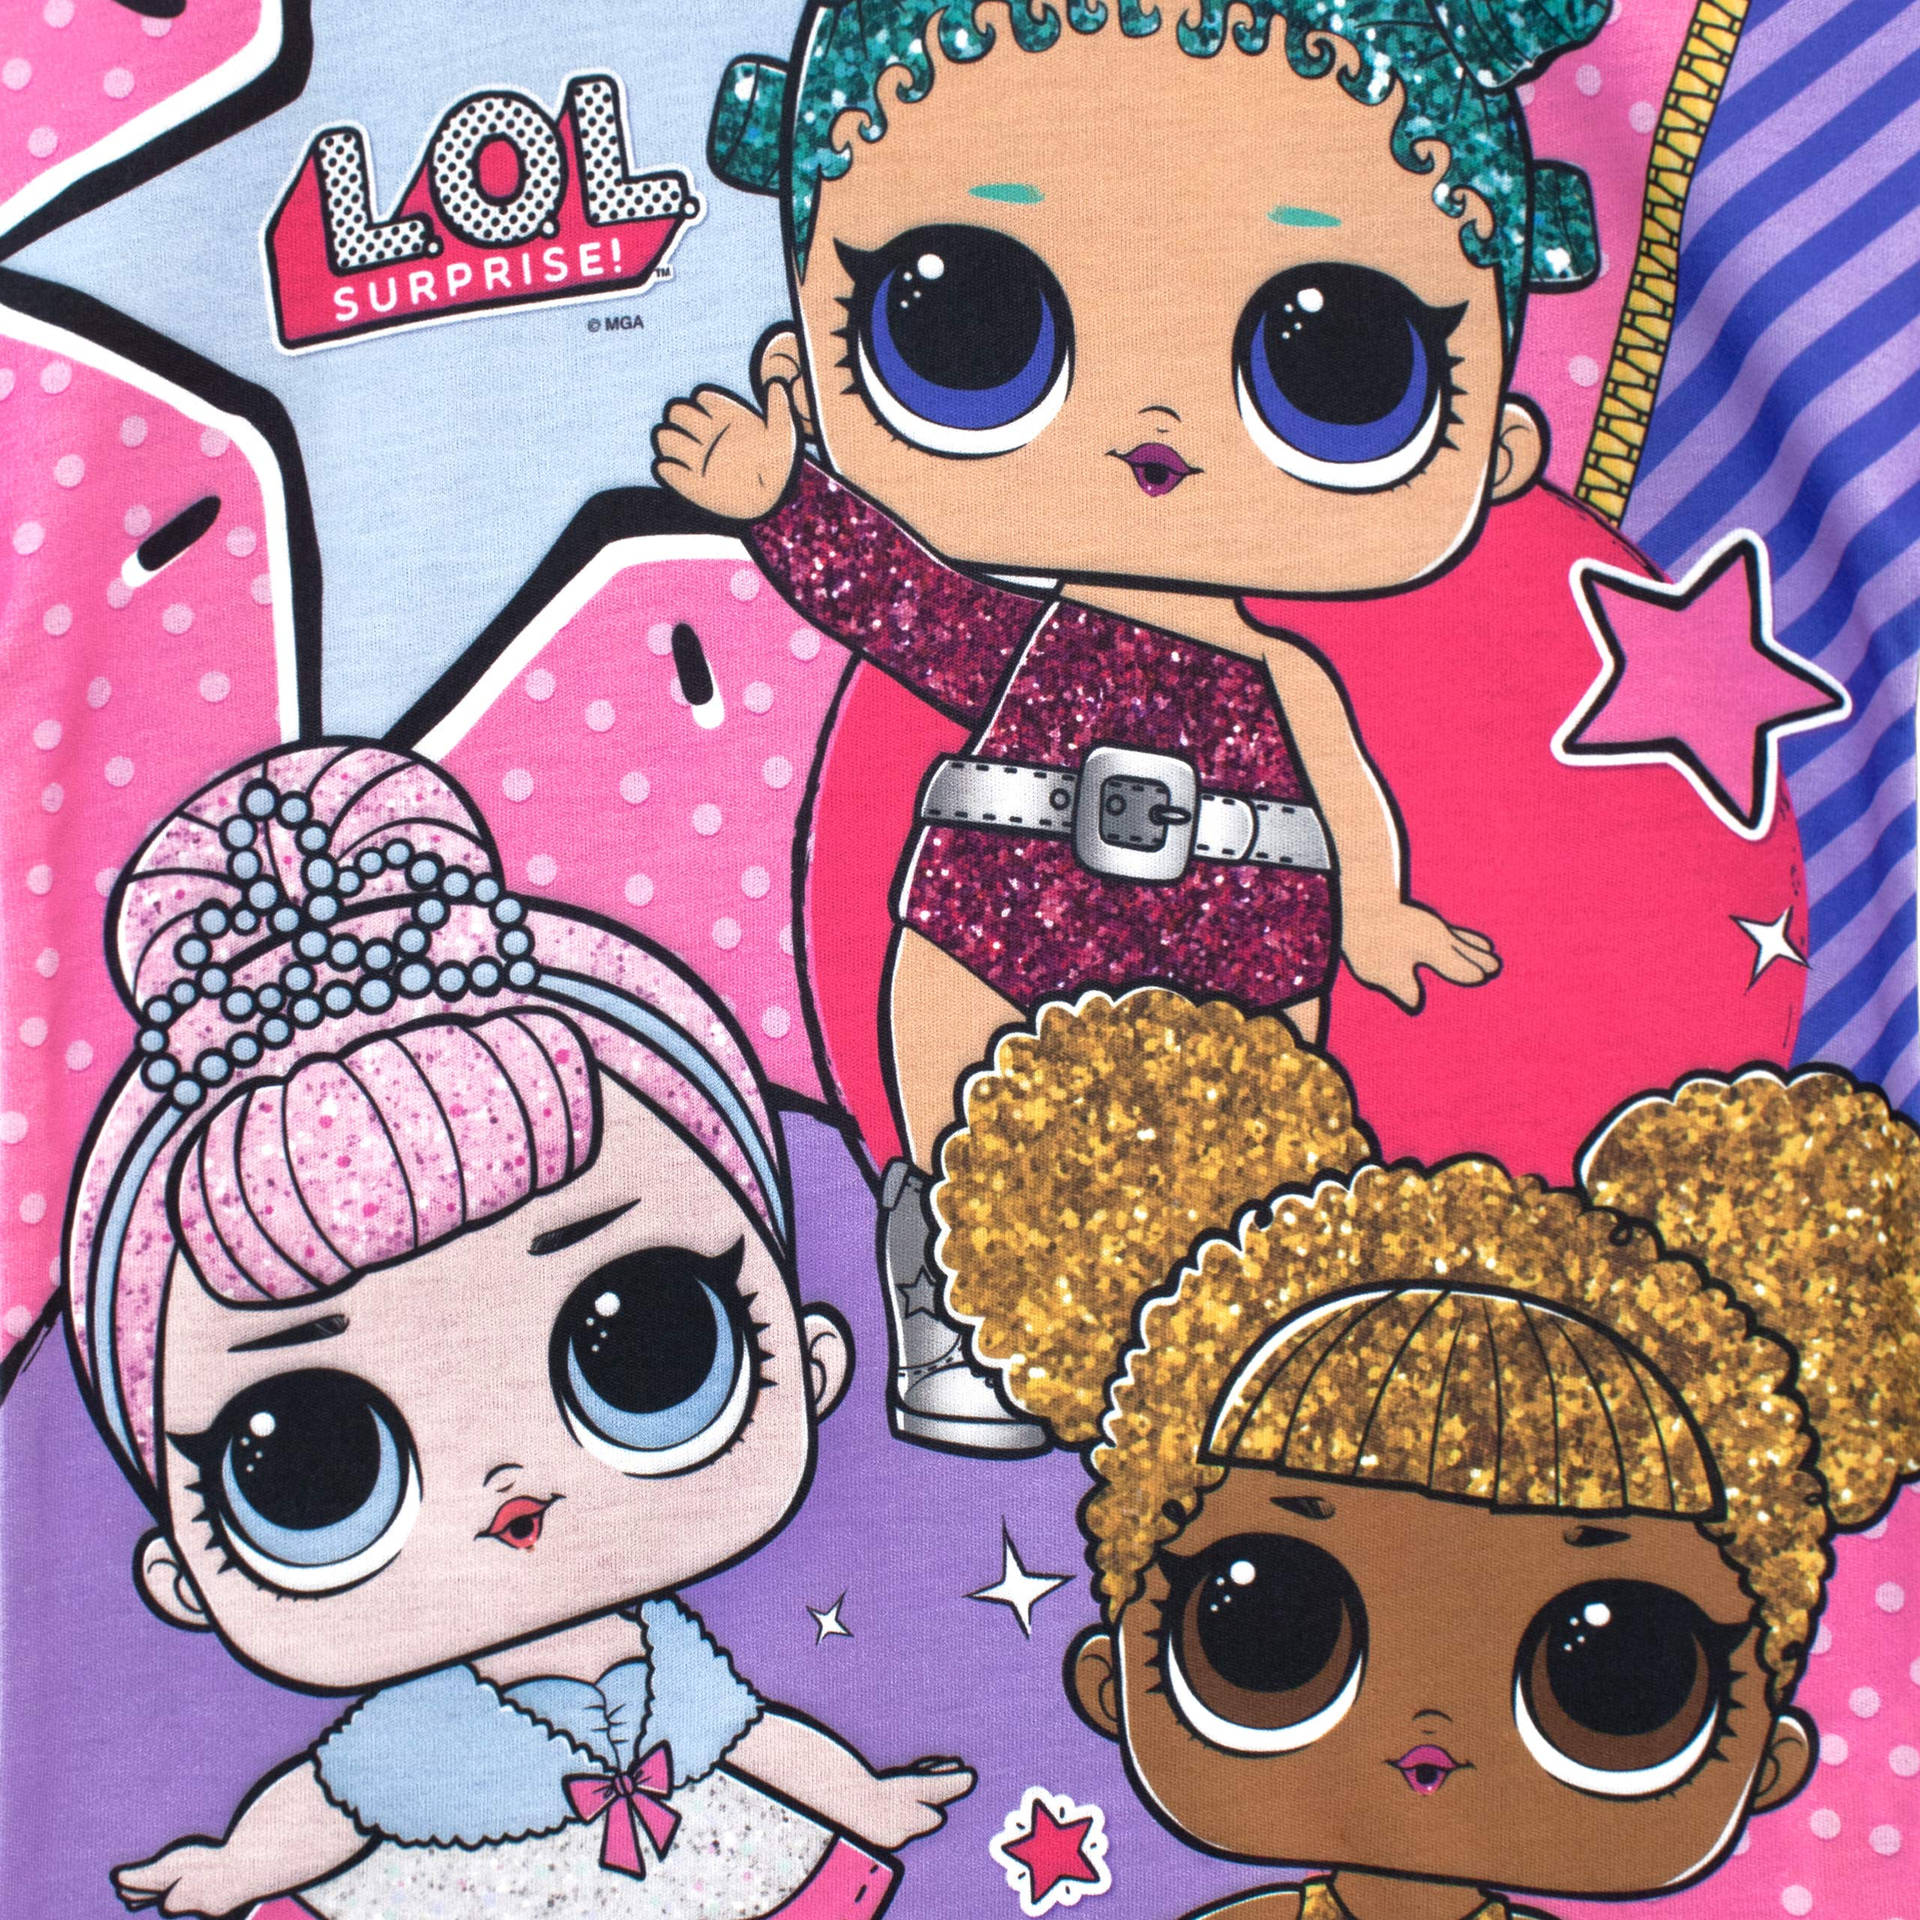 Join The Lol Dolls In Their World Of Adventure! Background